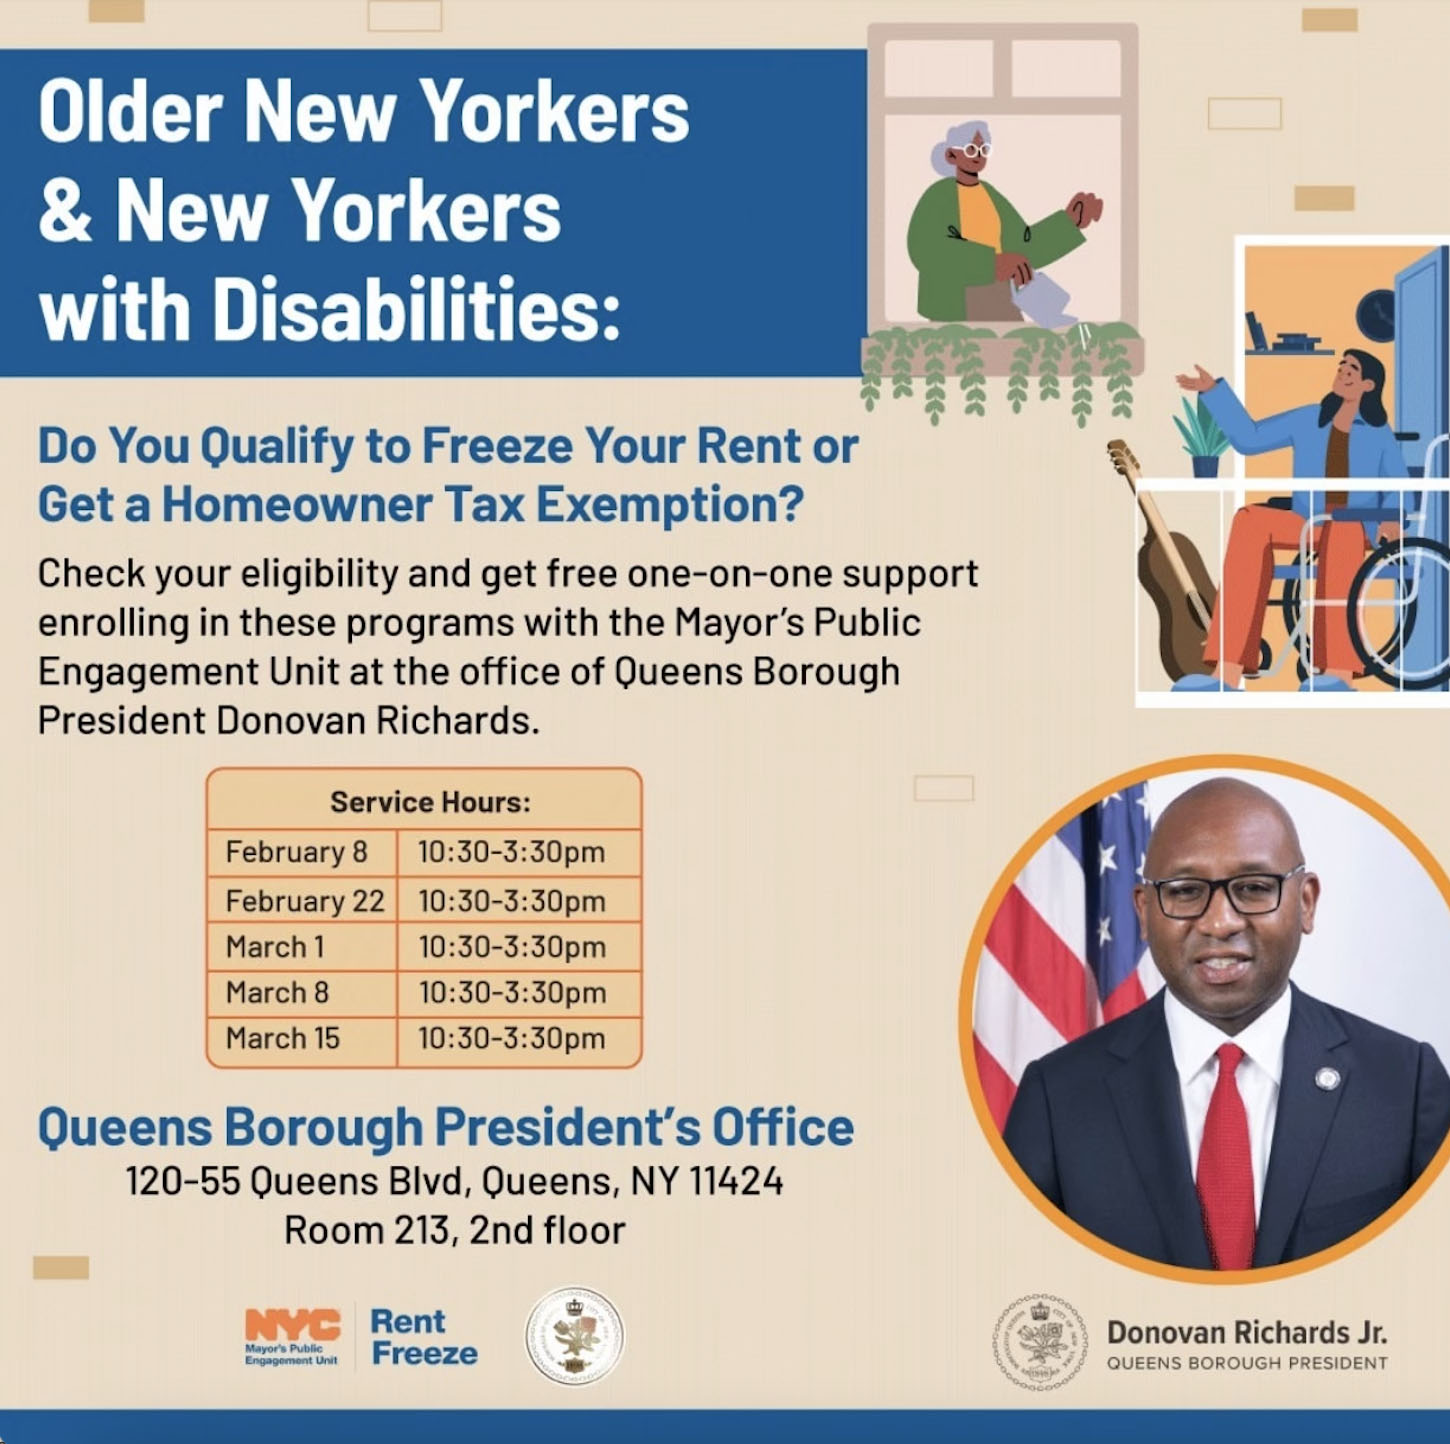 Graphic promoting PEU's office hours at Queens Borough President Donovan Richard's office: 120-55 Queens Blvd, Queens, NY. Room 213, second floor. Upcoming service hours are March 8, & March 15, all from 10:30-3:30.